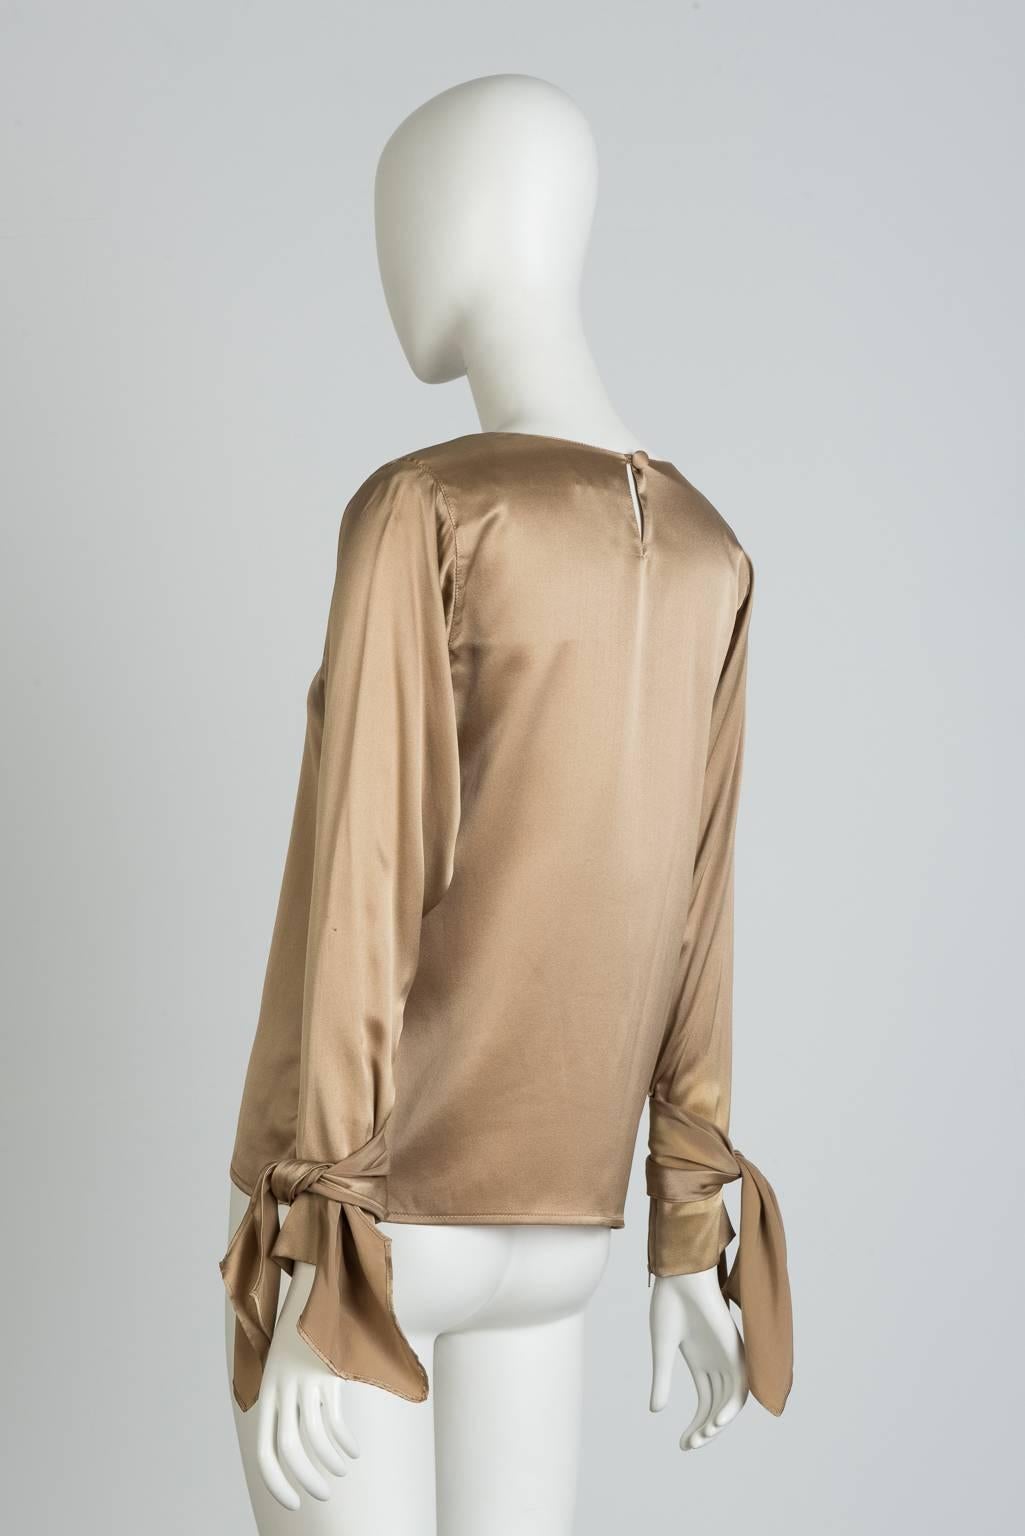 Yves Saint Laurent Silk Blouse In New Condition For Sale In Xiamen, Fujian